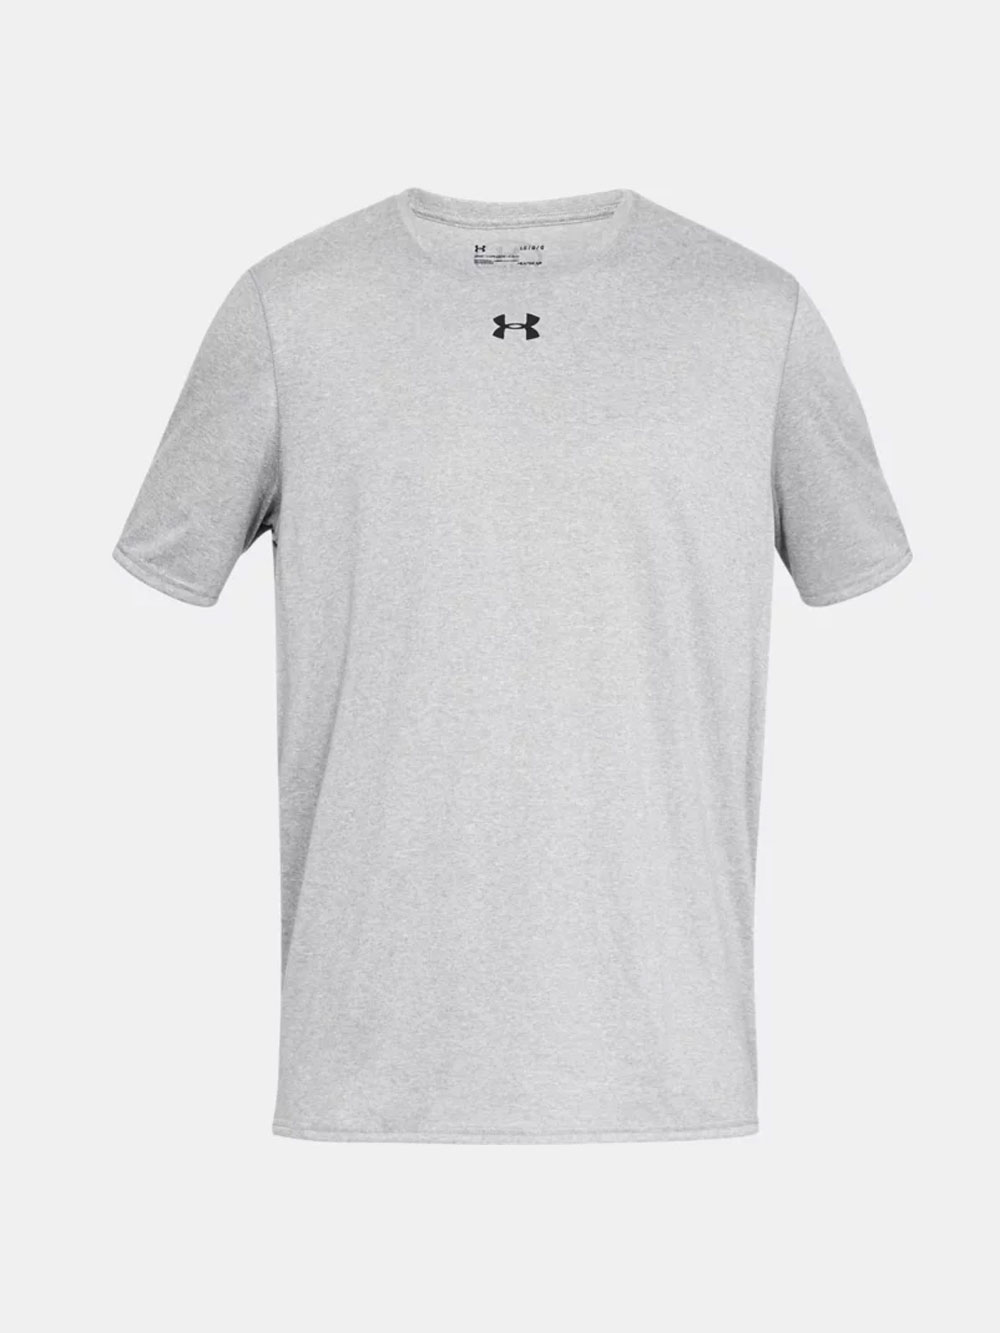 Under Armour Mens Locker Tee | Midwest Volleyball Warehouse